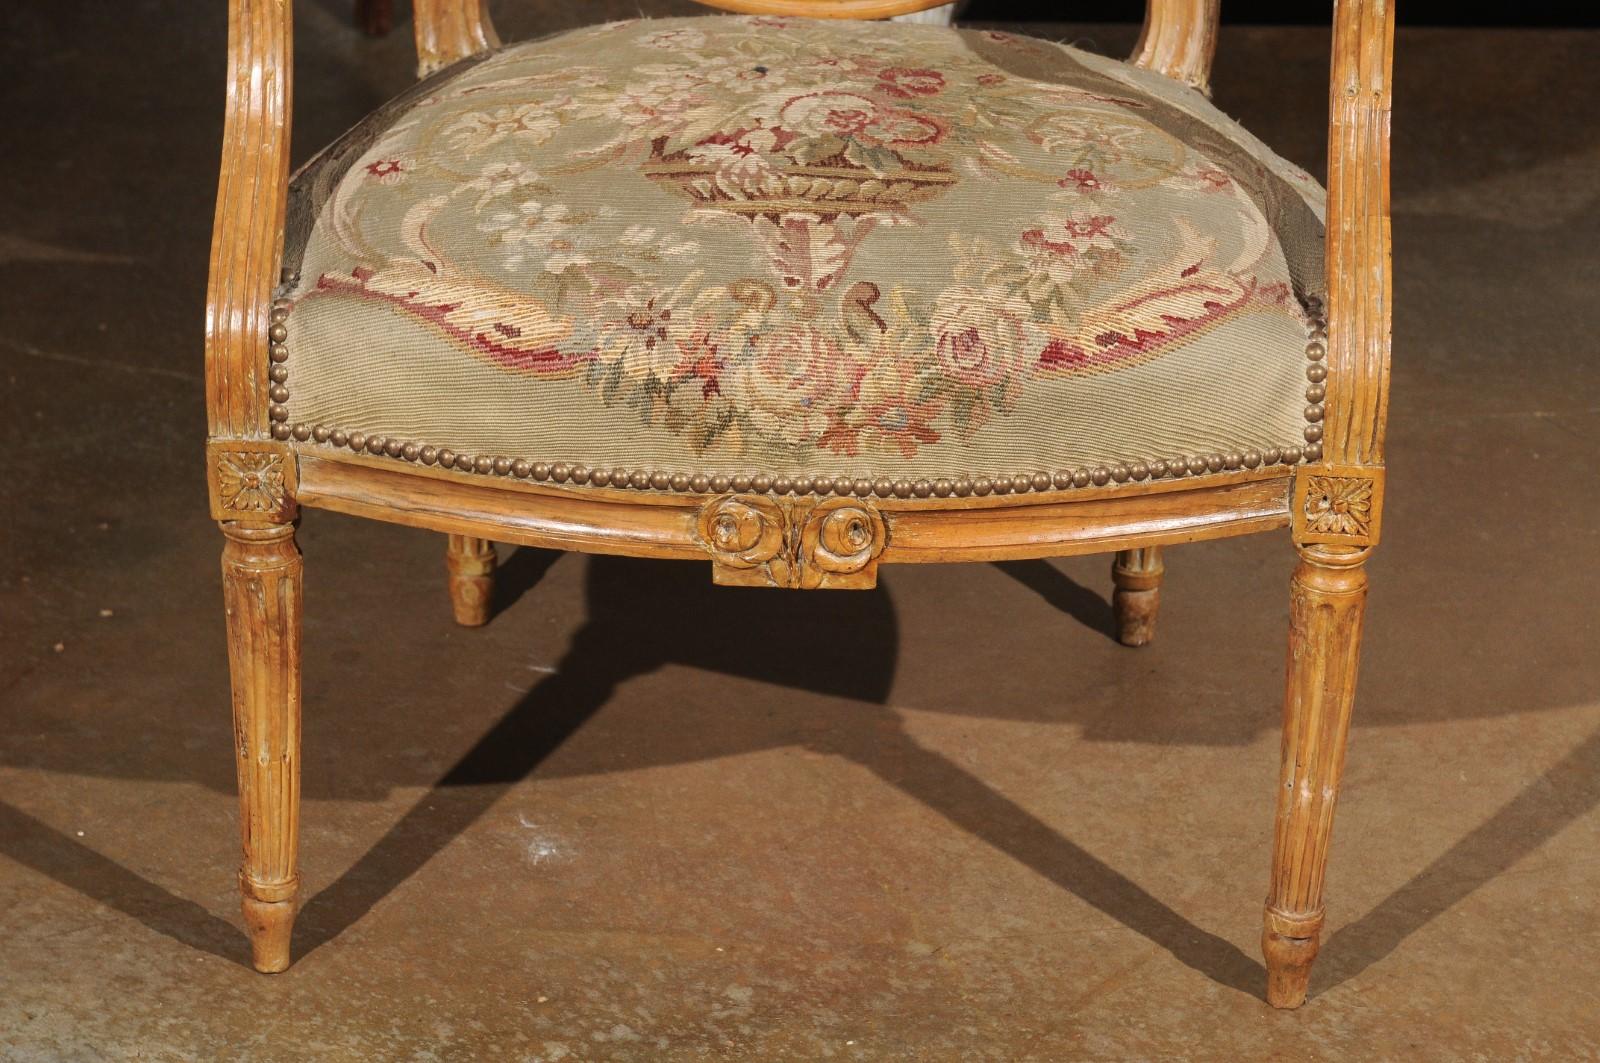 18th Century and Earlier French Louis XVI Period 18th Century Armchair with Floral Tapestry Upholstery For Sale